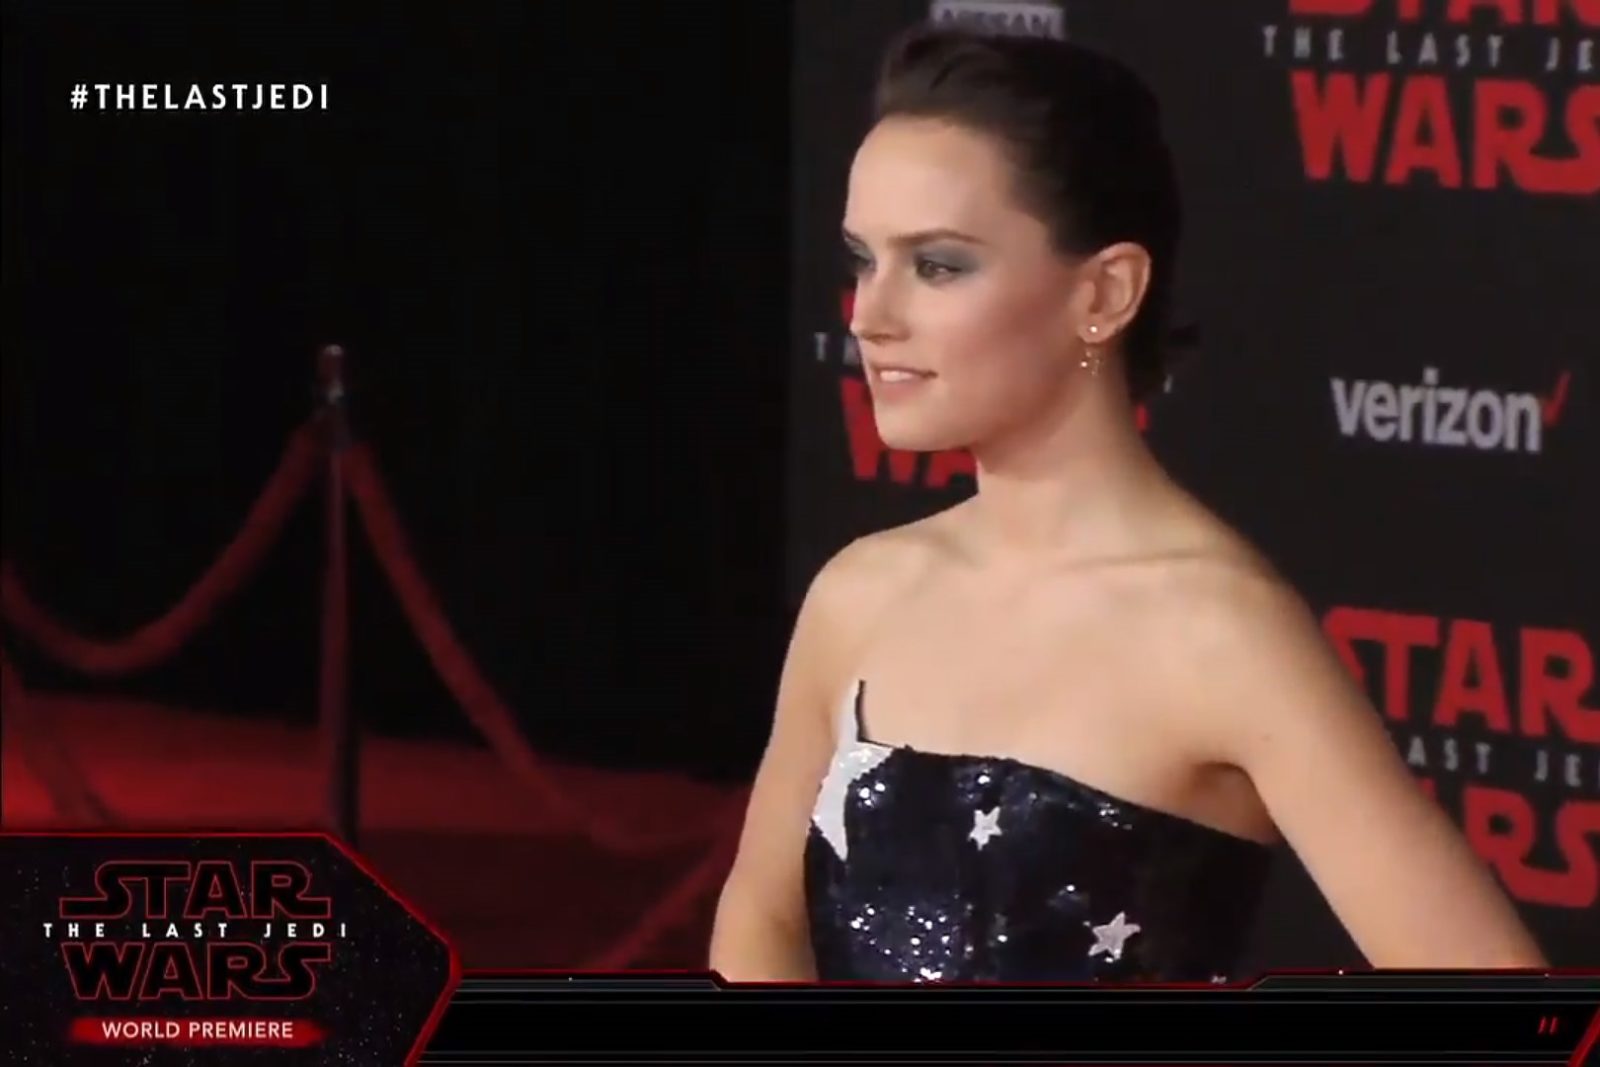 Star Wars Actresses on the TLJ Red Carpet